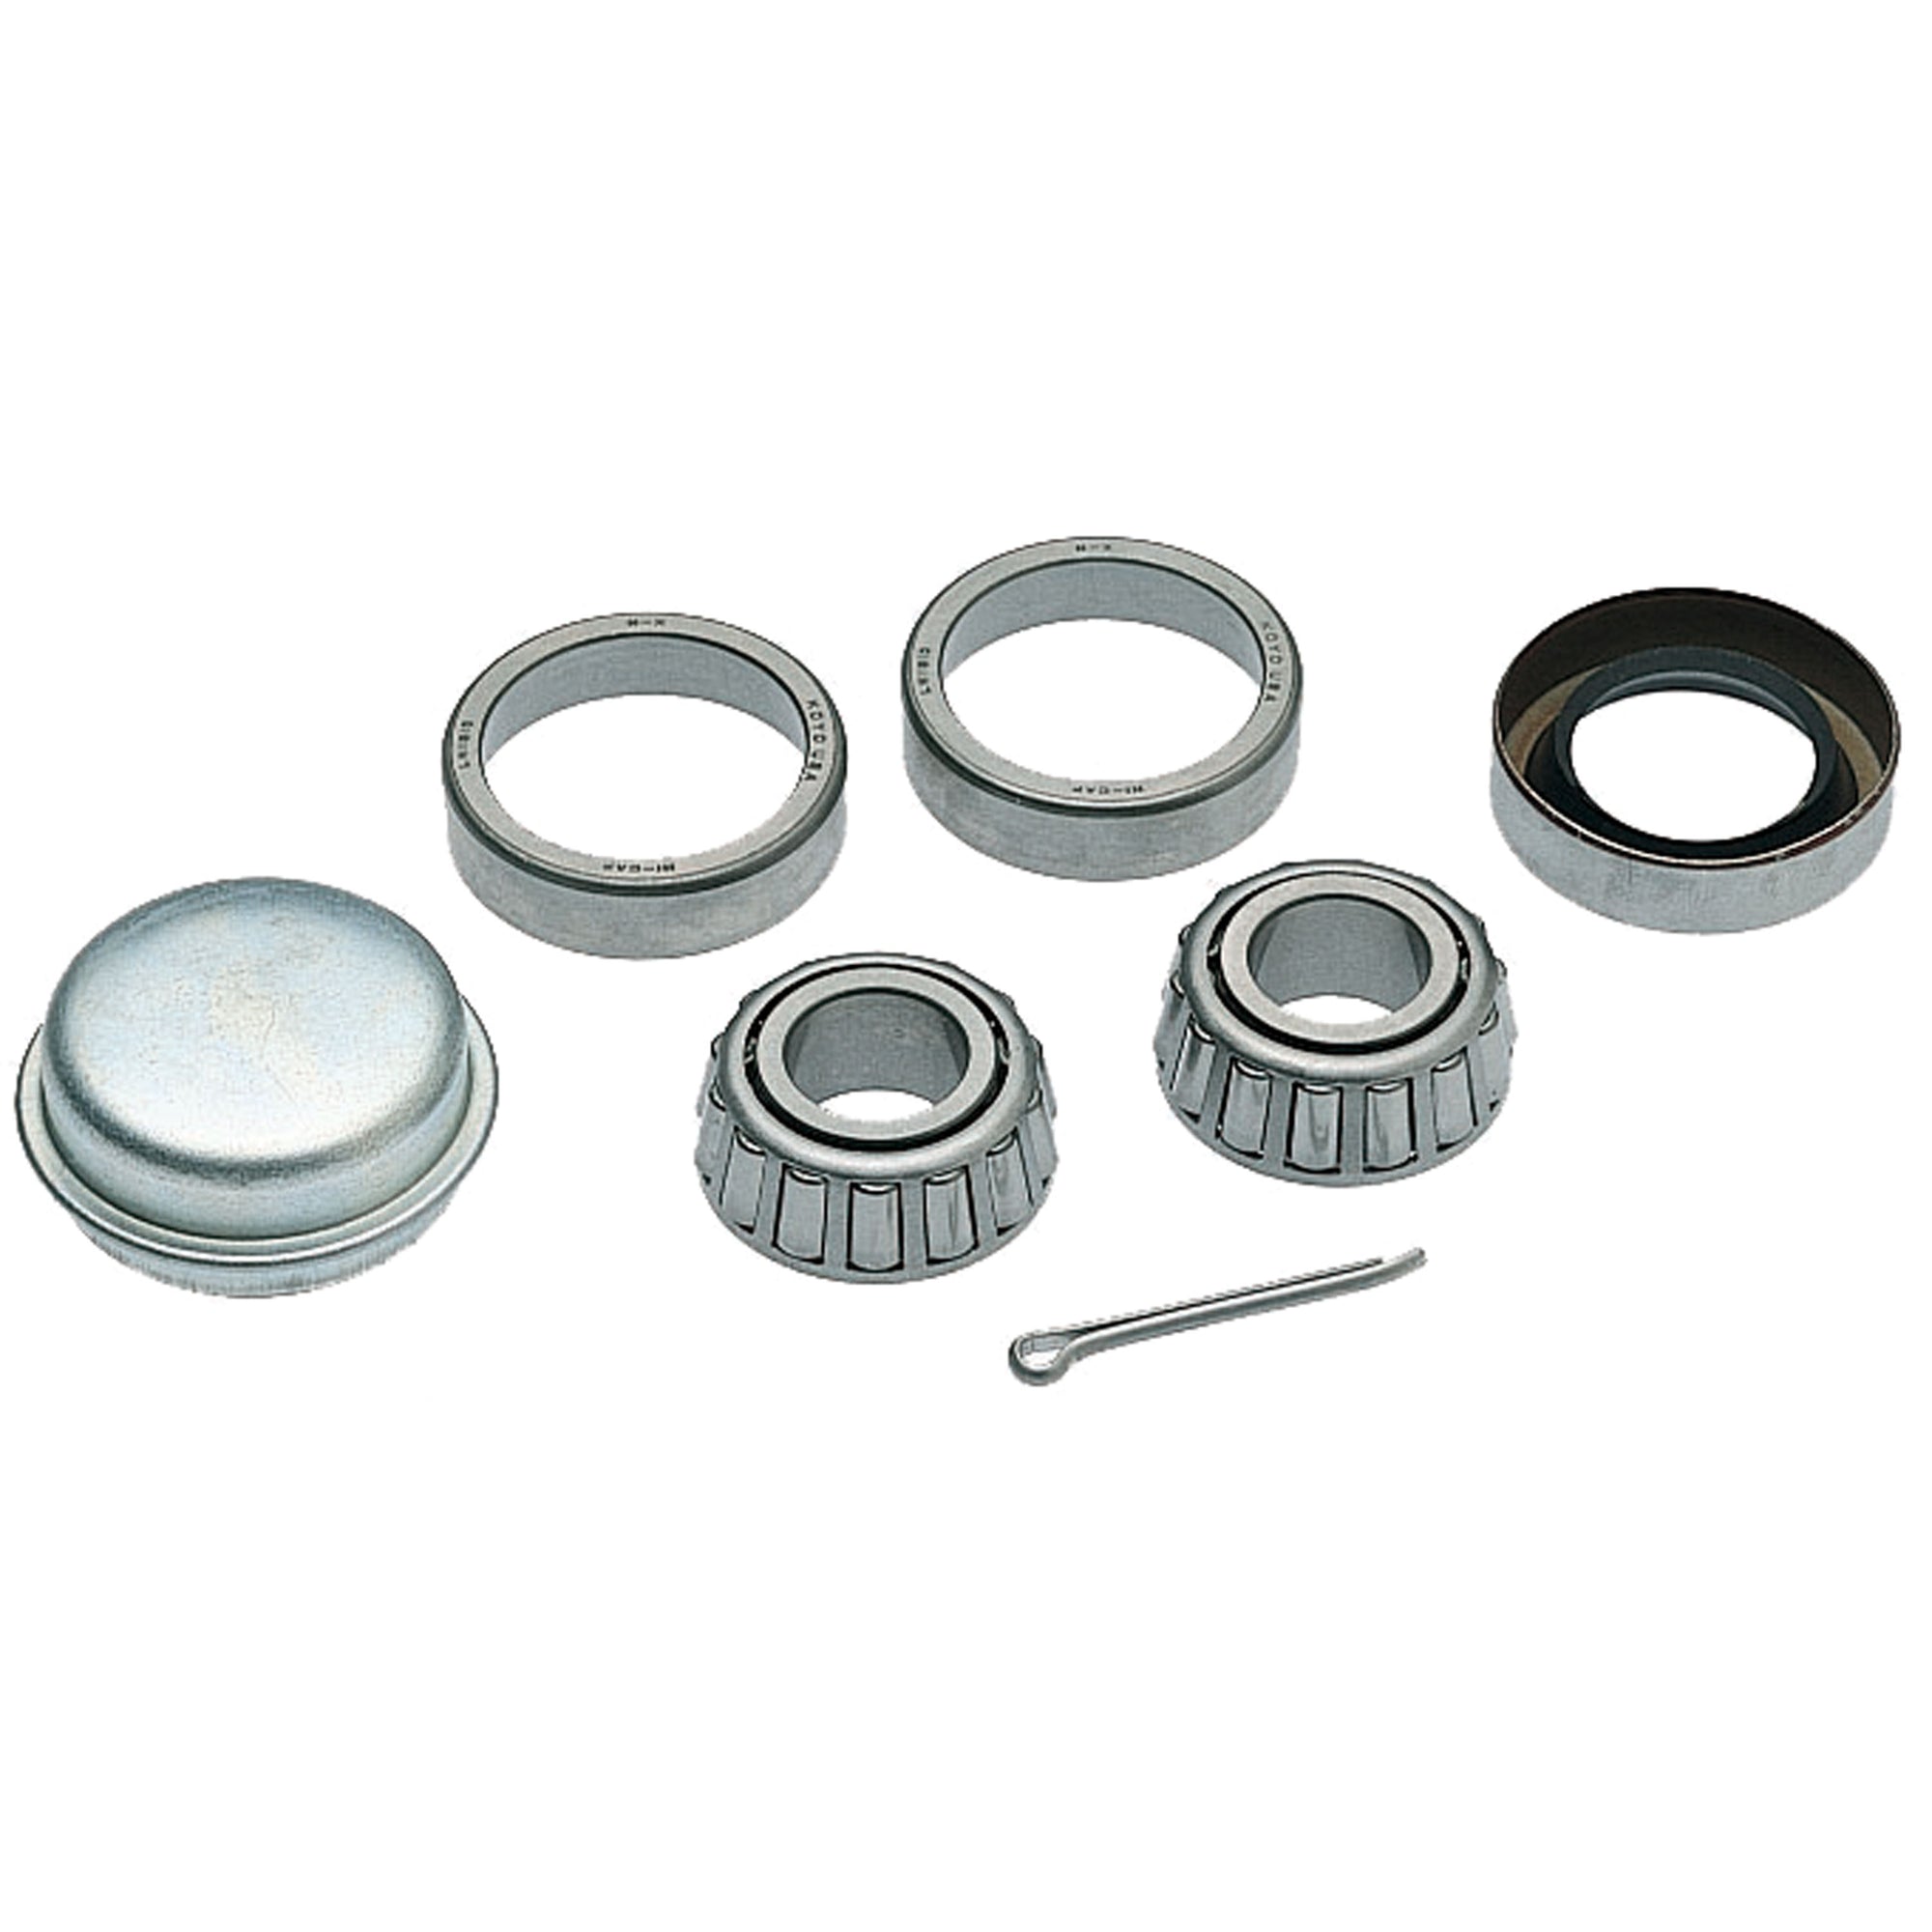 Dutton-Lainson 21806 6500 Series Bearing Set - 1-1/16 in. Spindle, 1.980 Outer Hub